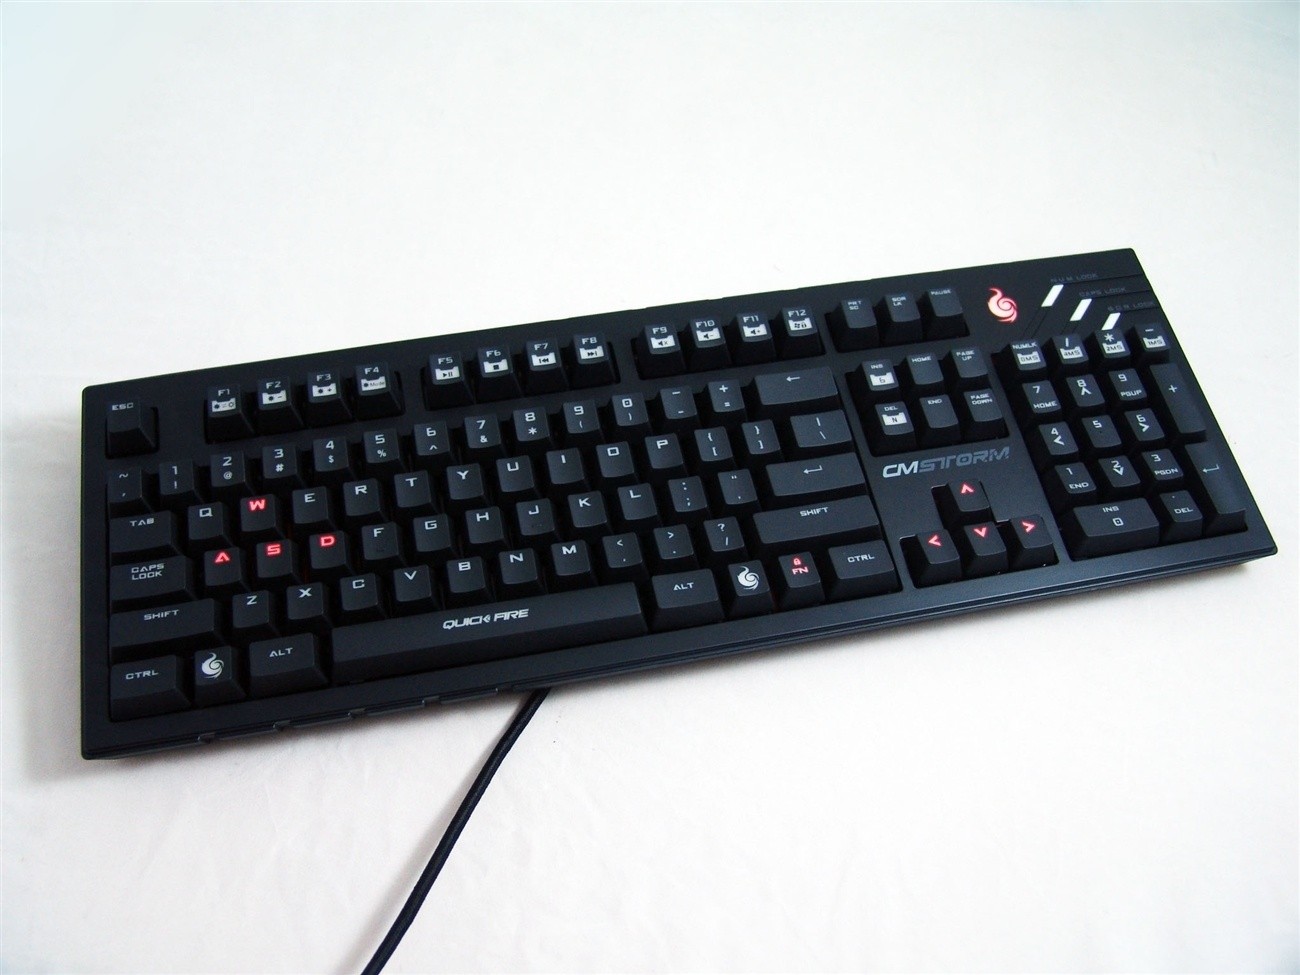 Tag et bad lobby trojansk hest CM Storm QuickFire Pro Mechanical Gaming Keyboard Review